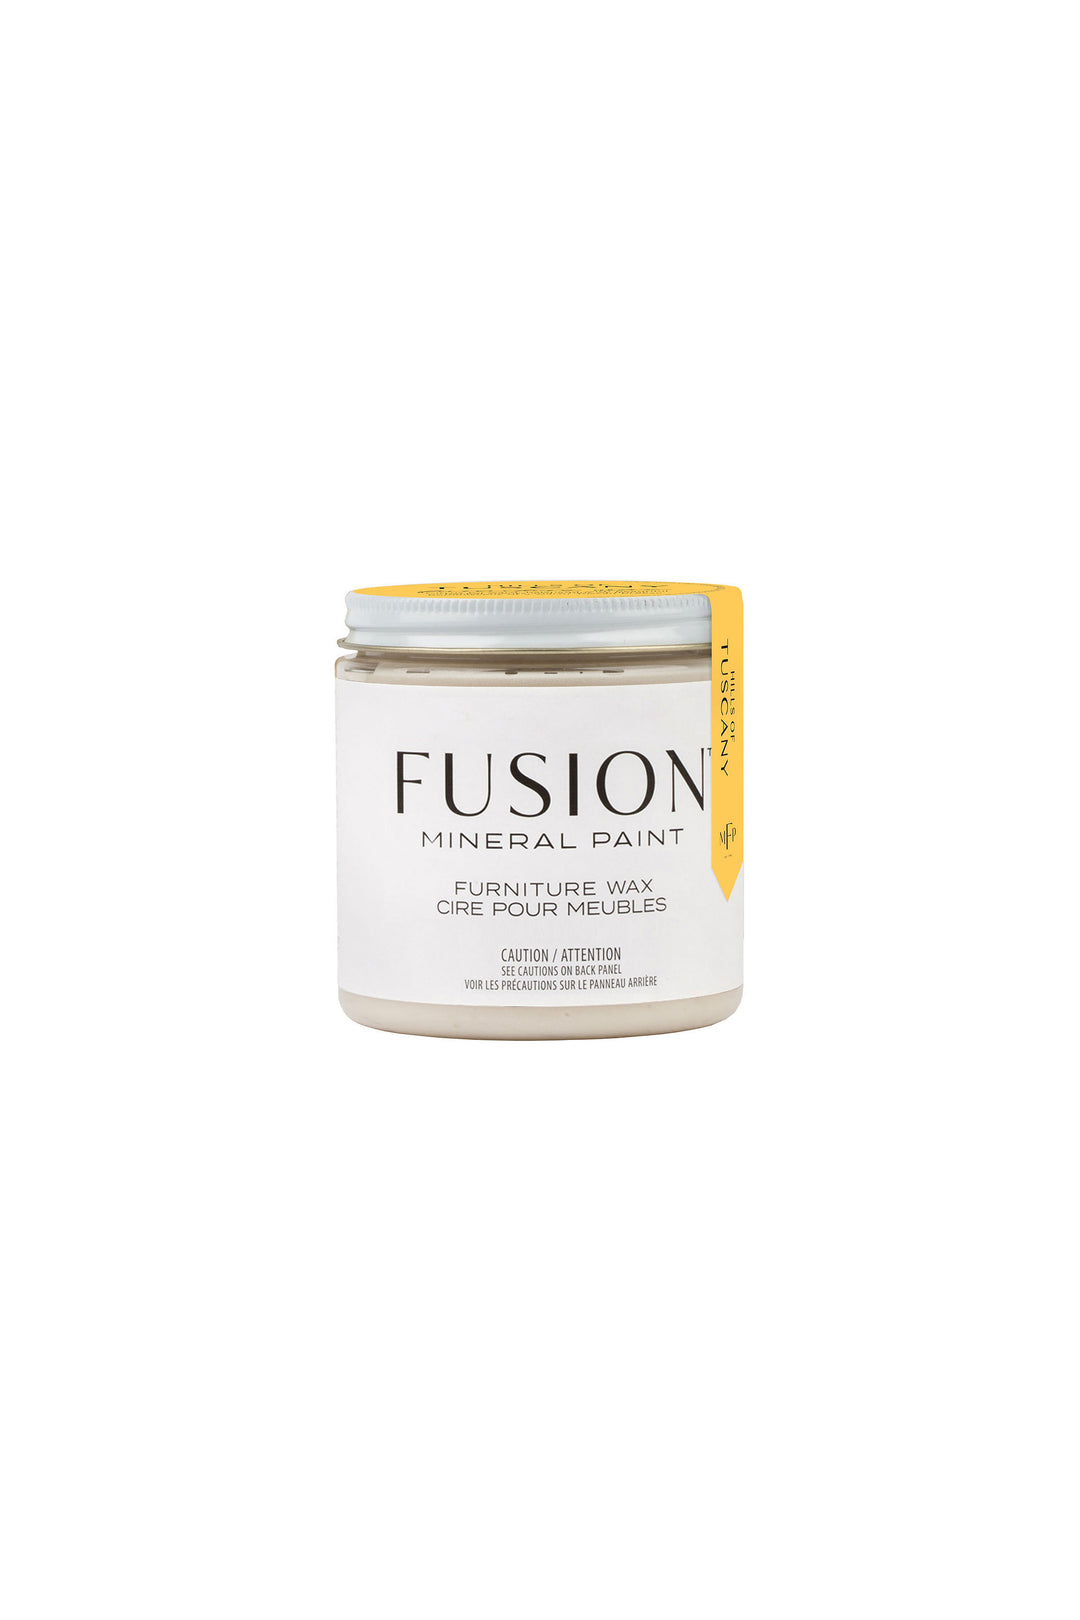 Fusion Furniture Wax - Clear Hills of Tuscany